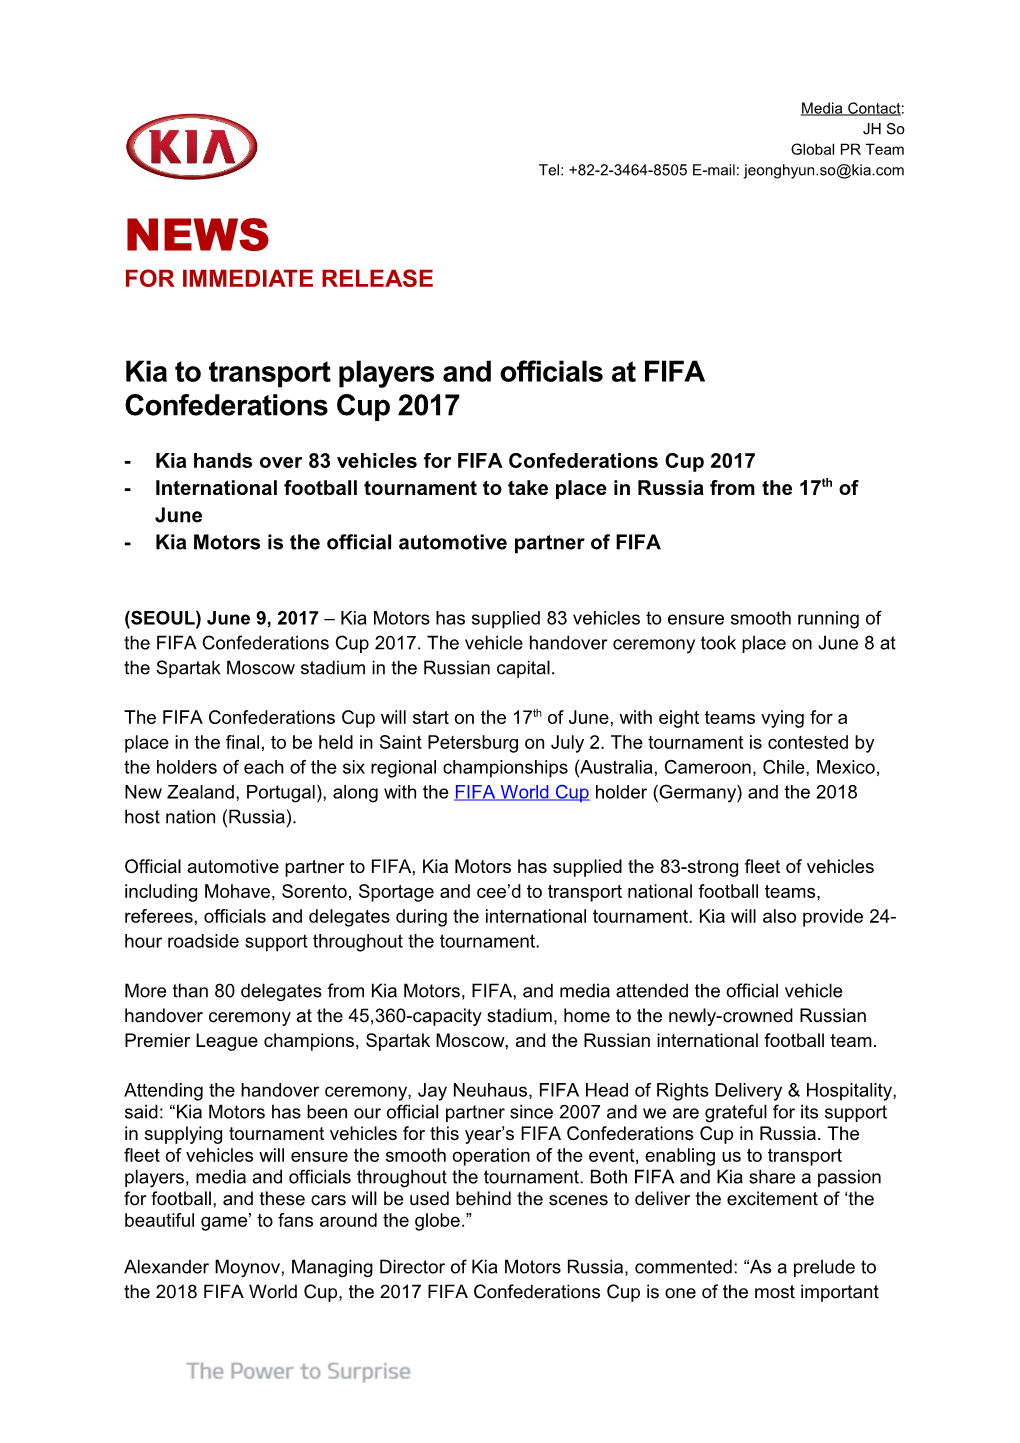 Kia to Transport Players and Officials at FIFA